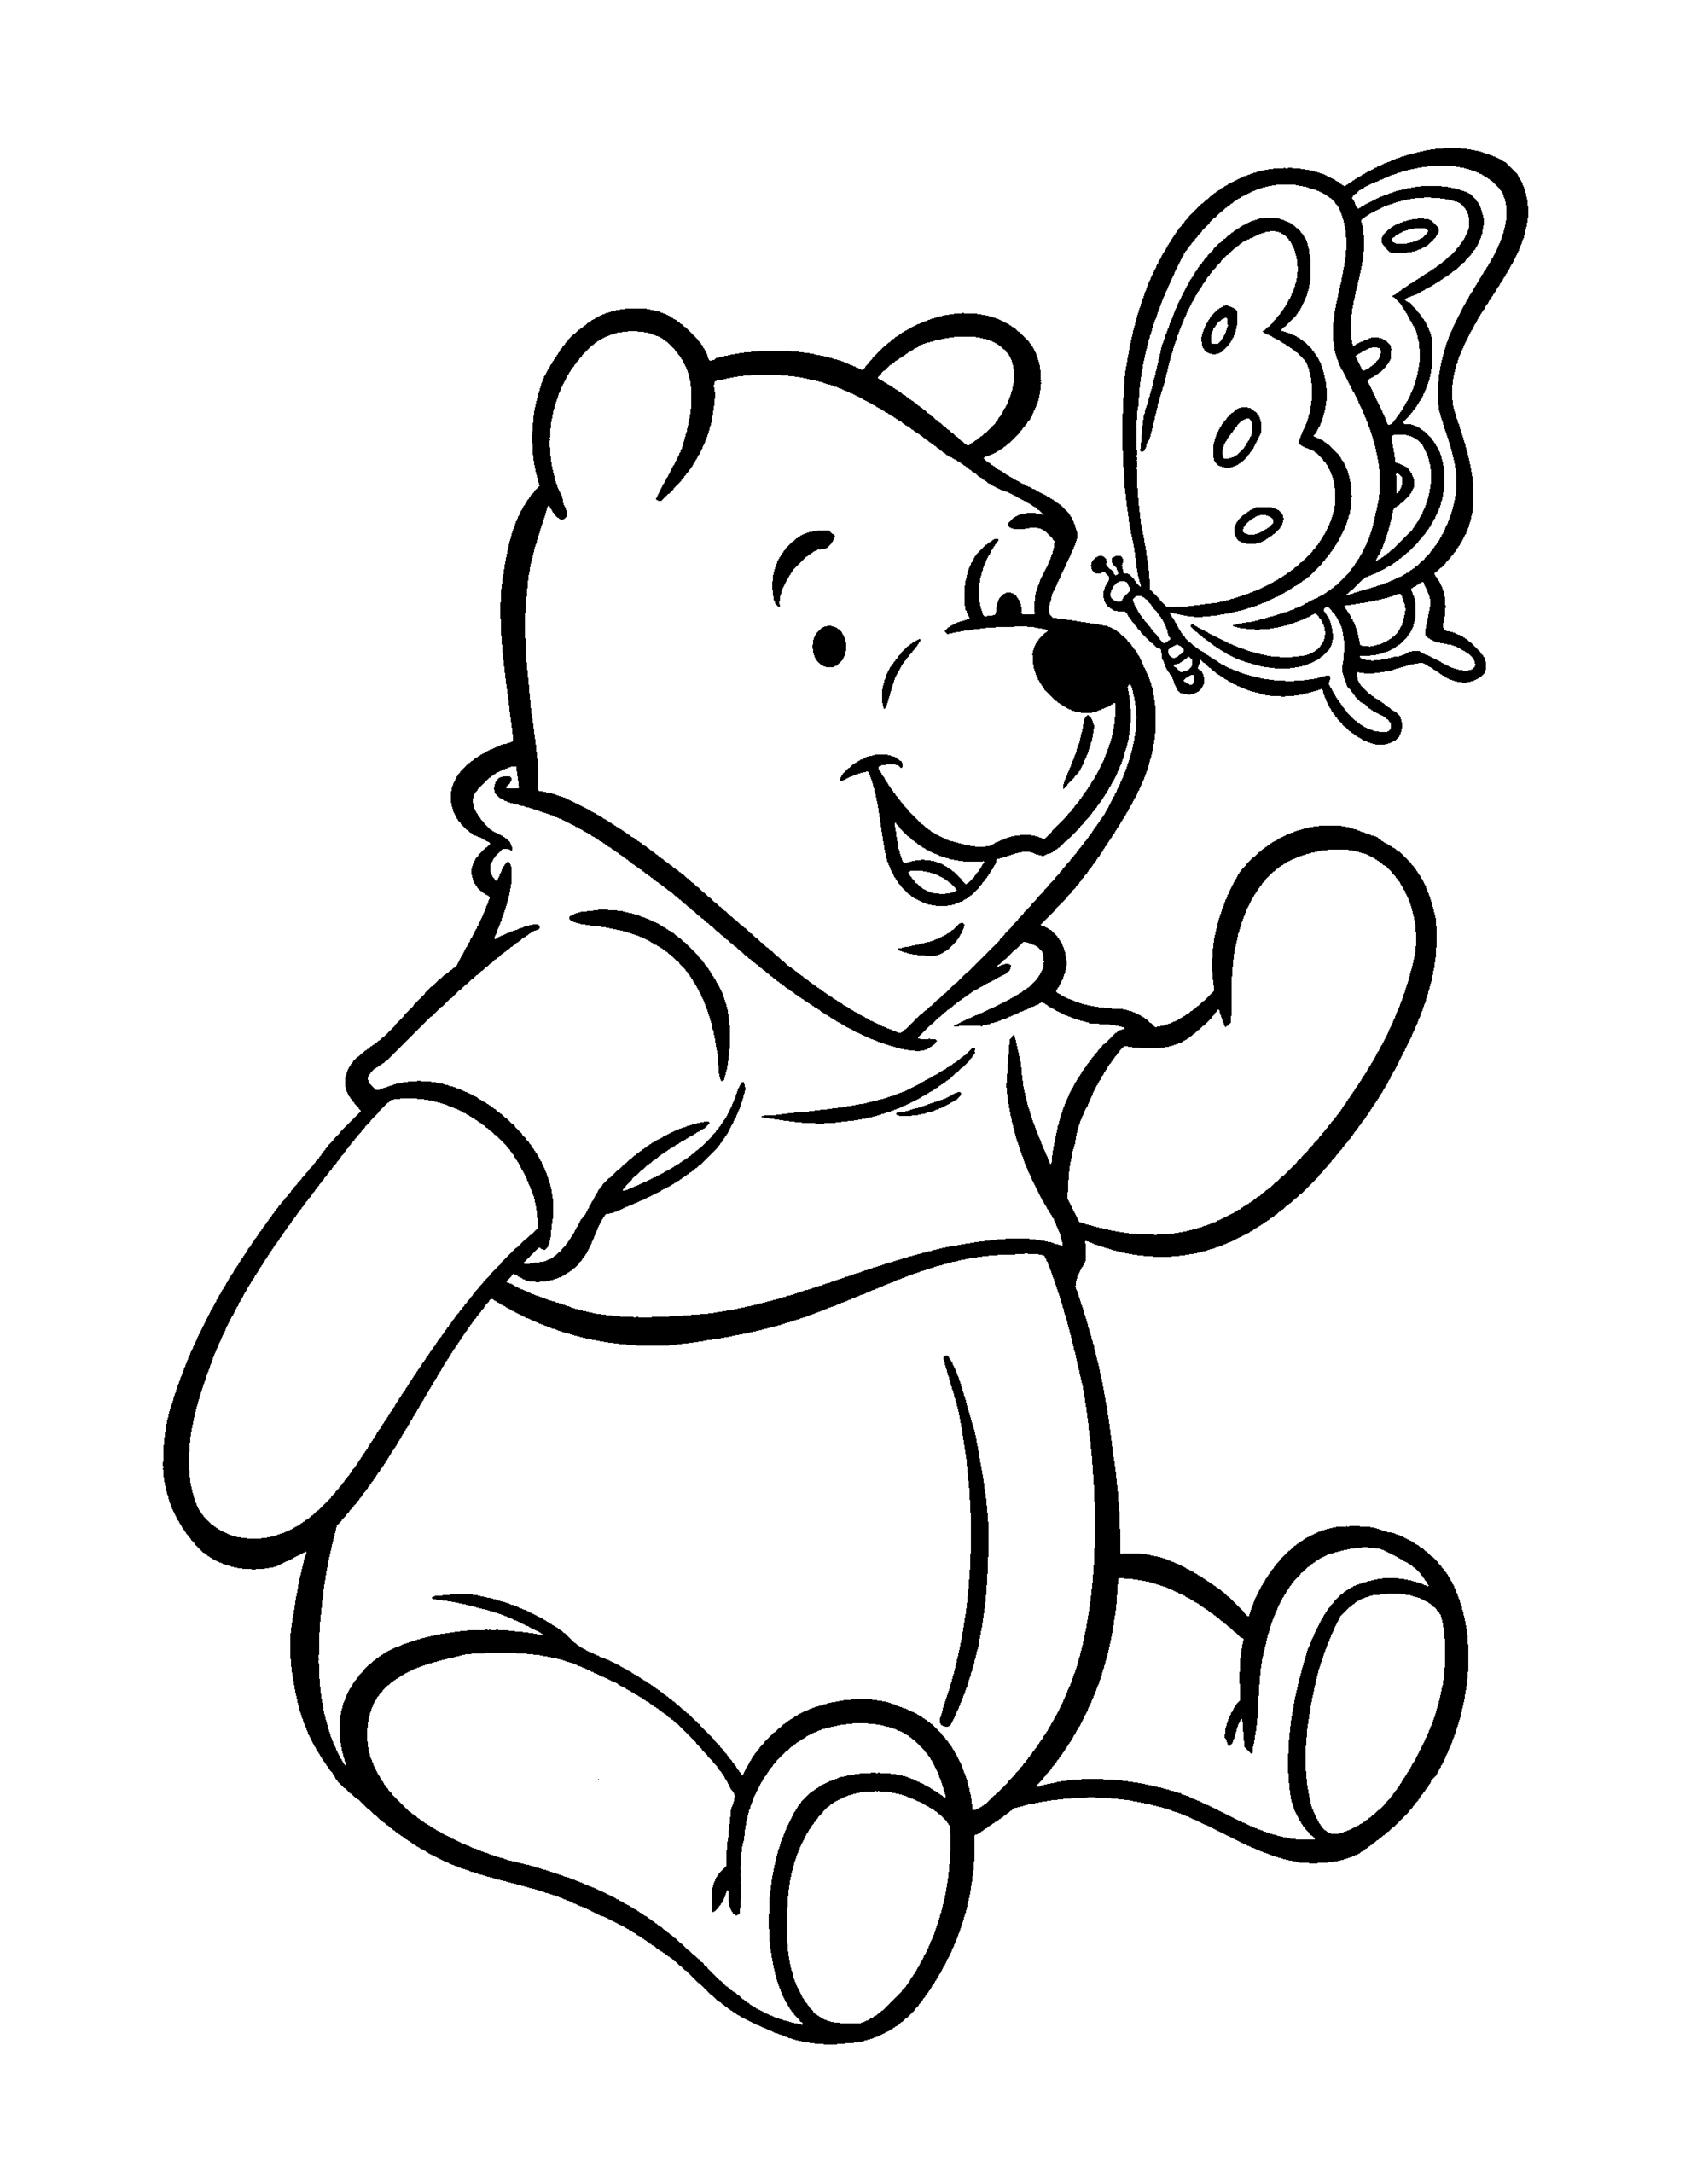 Winnie the Pooh Coloring Pages Cartoons Winnie The Pooh For Kids Printable 2020 7224 Coloring4free